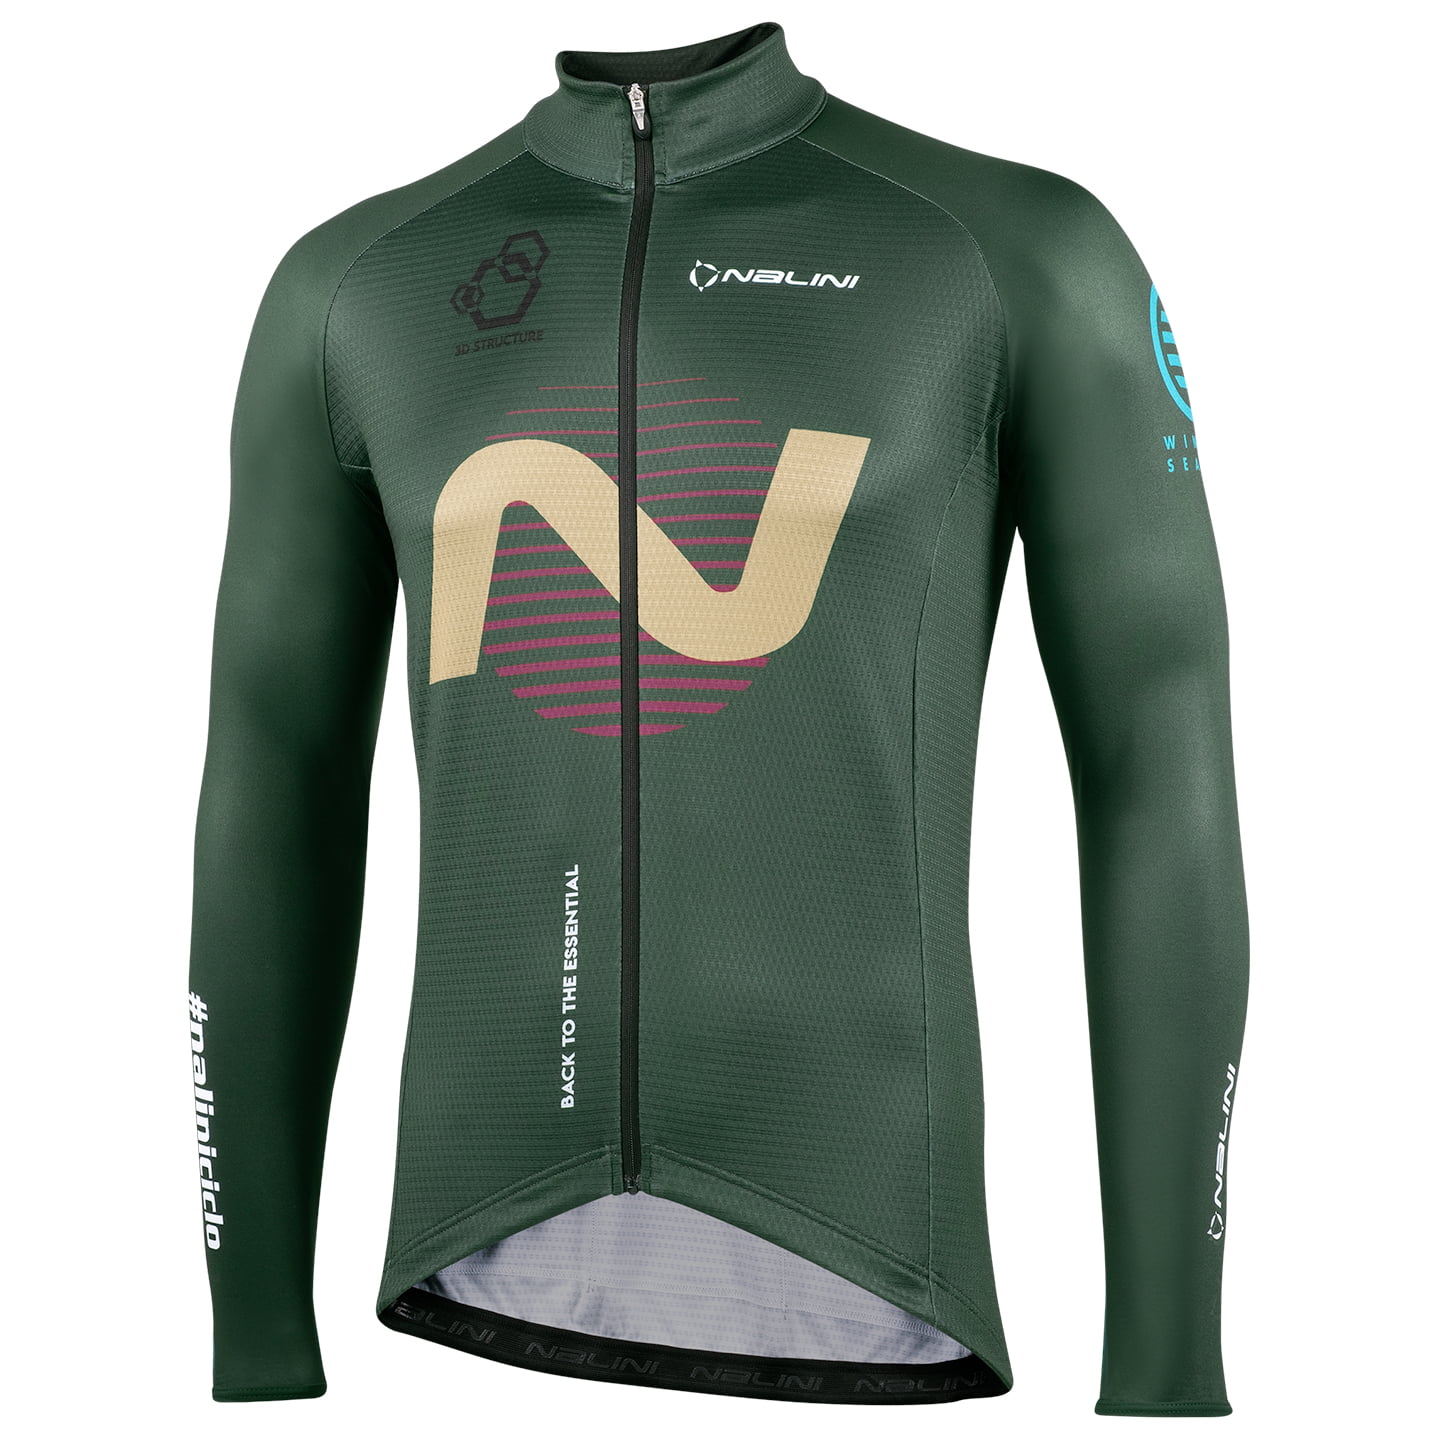 NALINI New Warm Long Sleeve Jersey, for men, size M, Cycling jersey, Cycling clothing